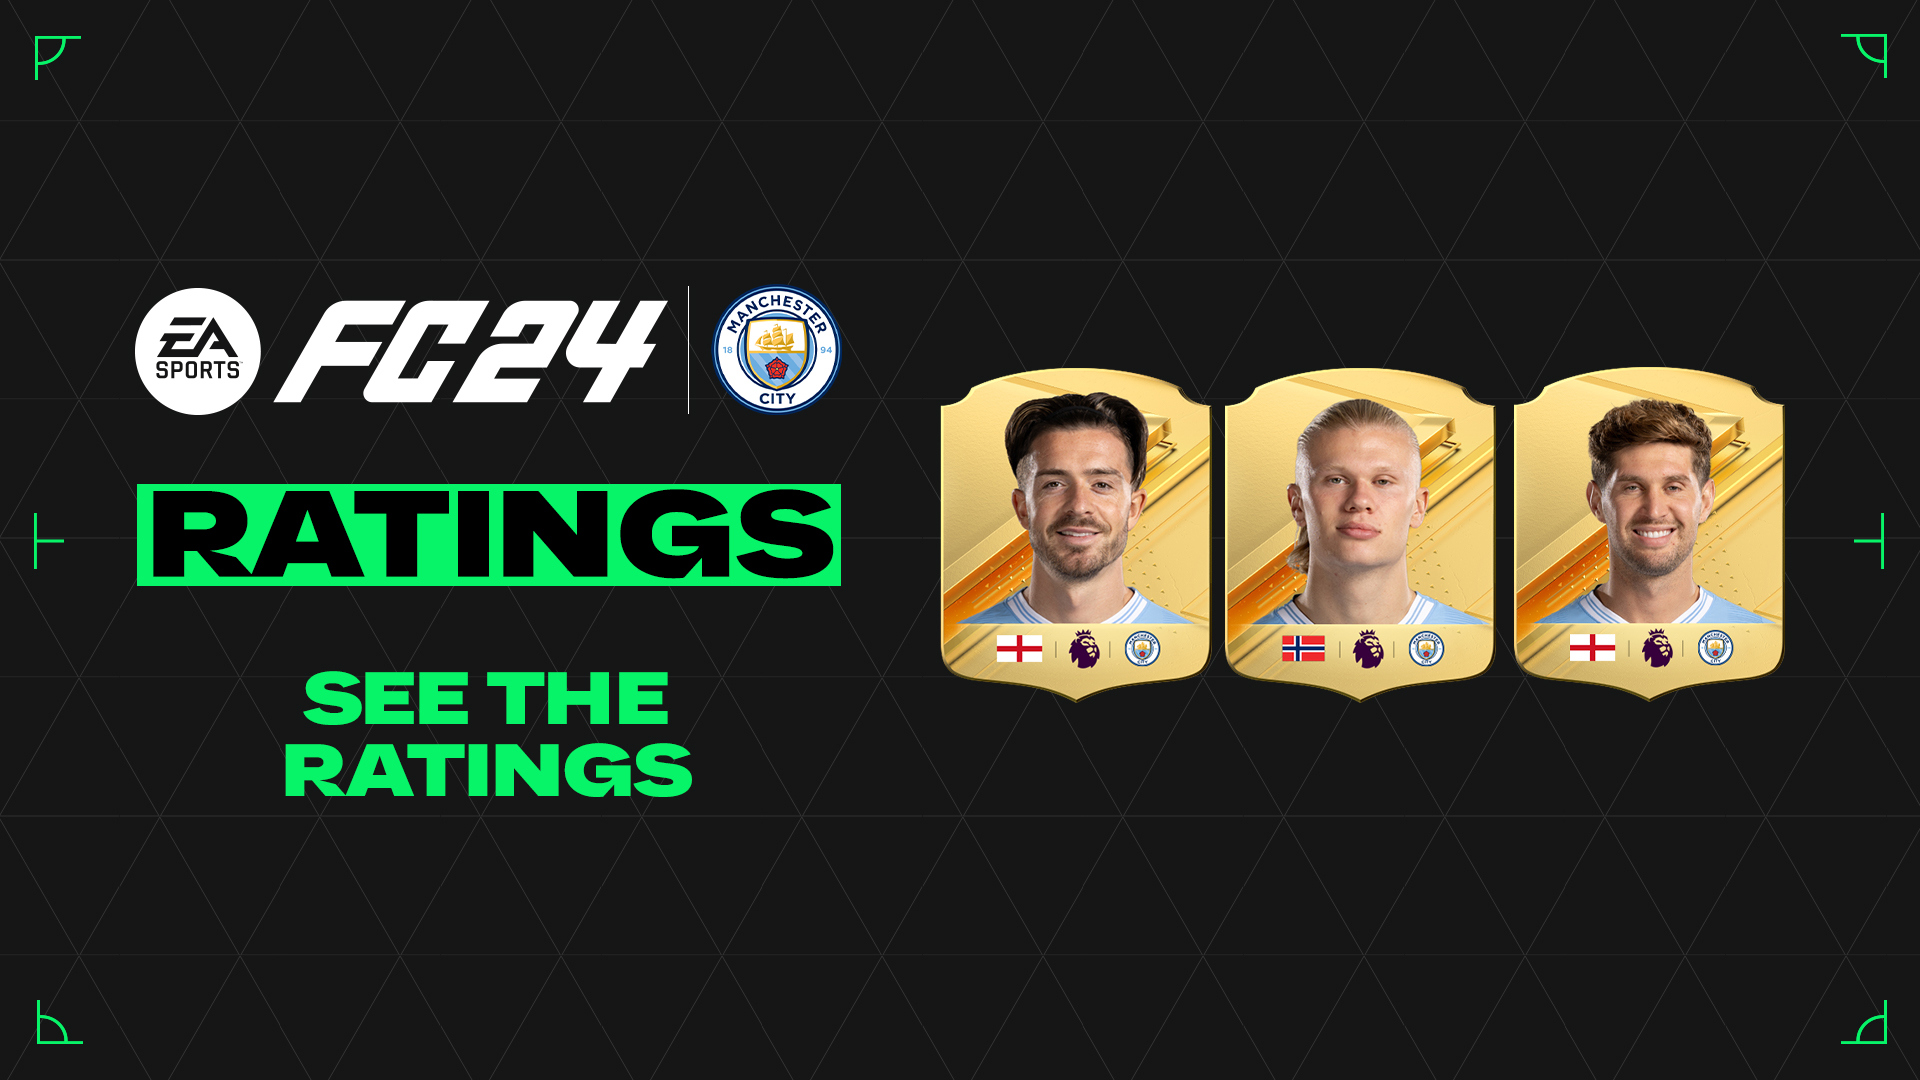 Latest EA Sports FC 24 rumors suggests the Ultimate Team ratings